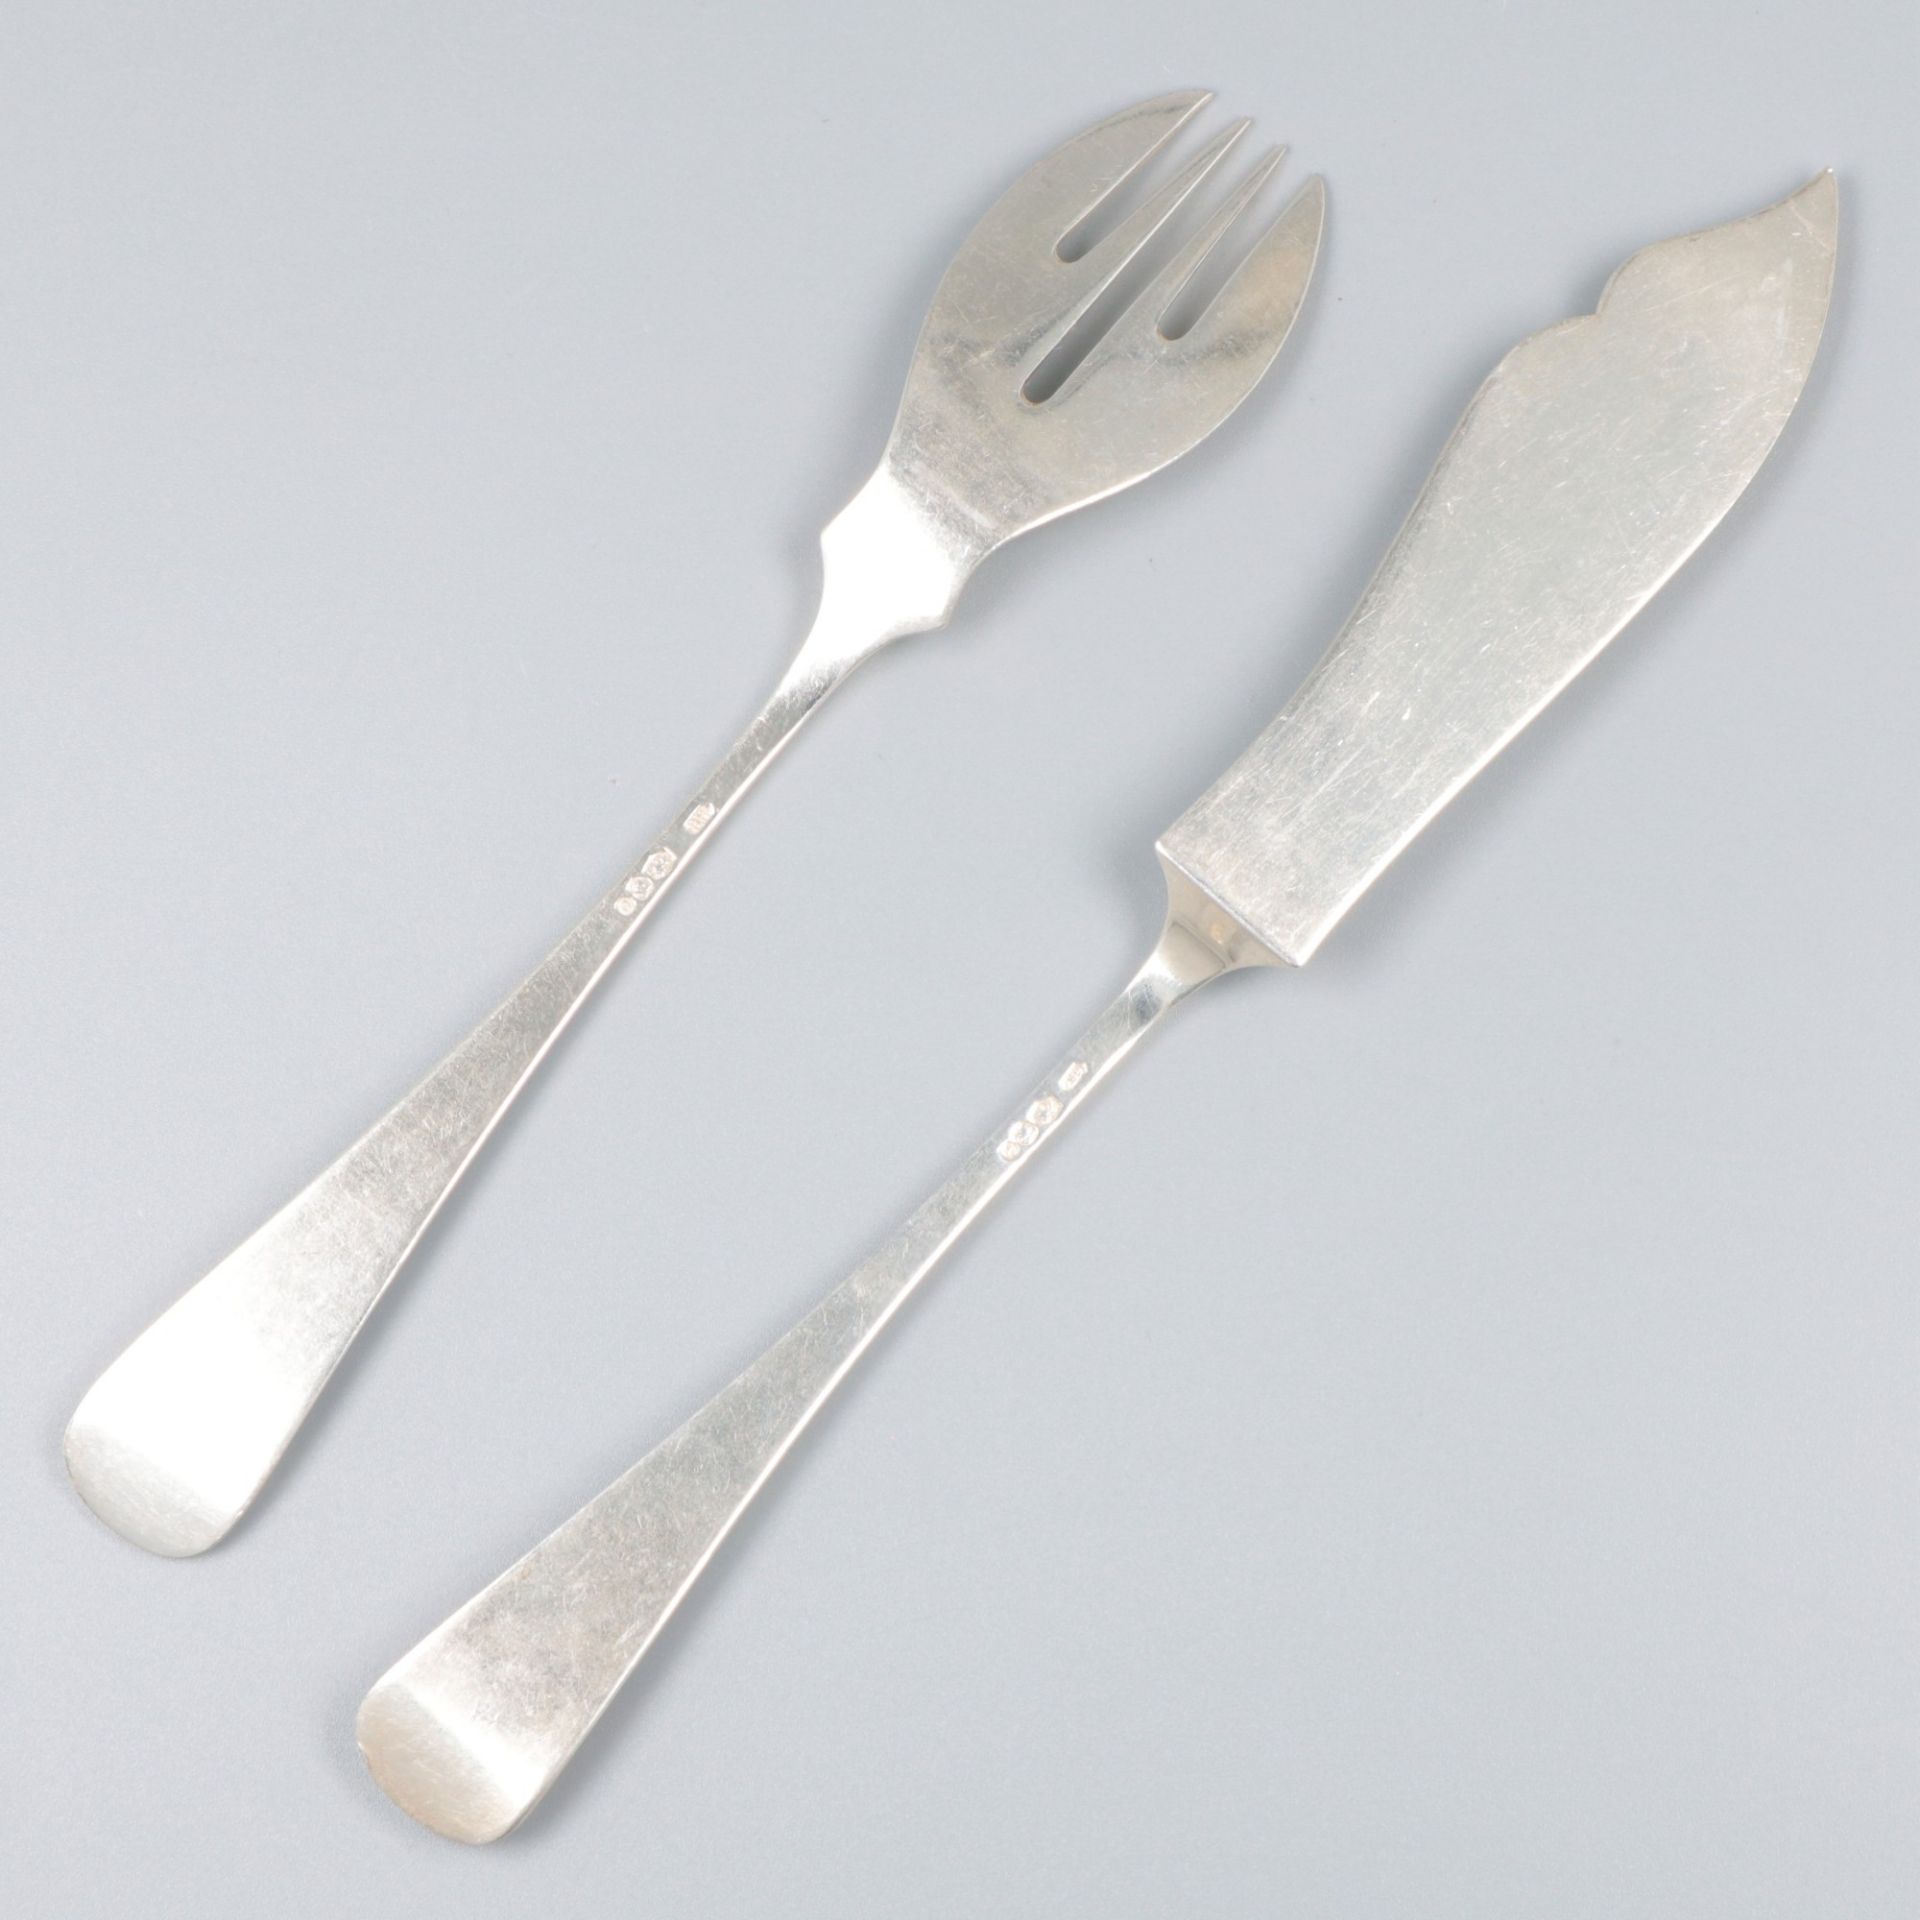 12-piece fish cutlery set "Haags Lofje", silver. - Image 5 of 6